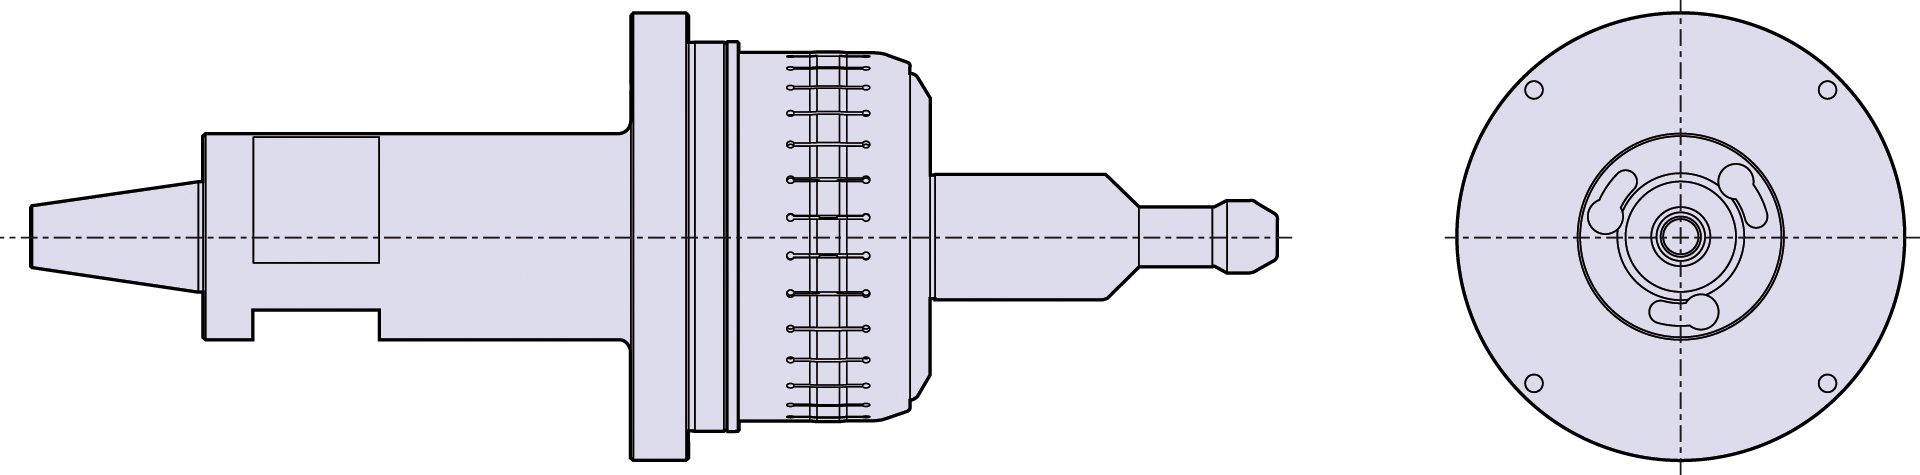 Pin with backlash recovery for gear cutting with creator